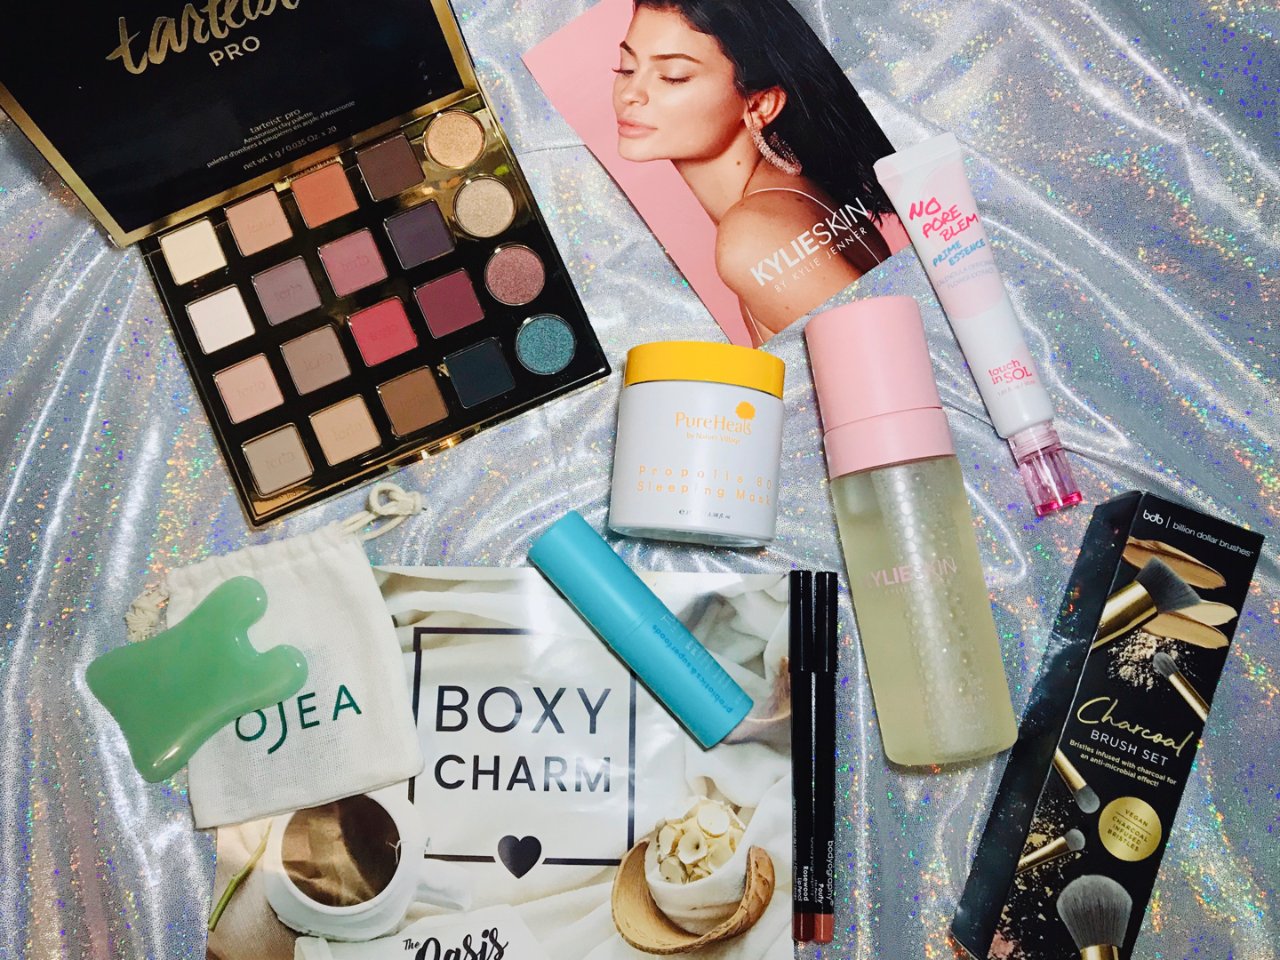 Boxycharm,Tarte,Kylie Cosmetics,Osea,TULA SKINCARE,Billion Dollar Brows,PureHeal's,Touch In SOL